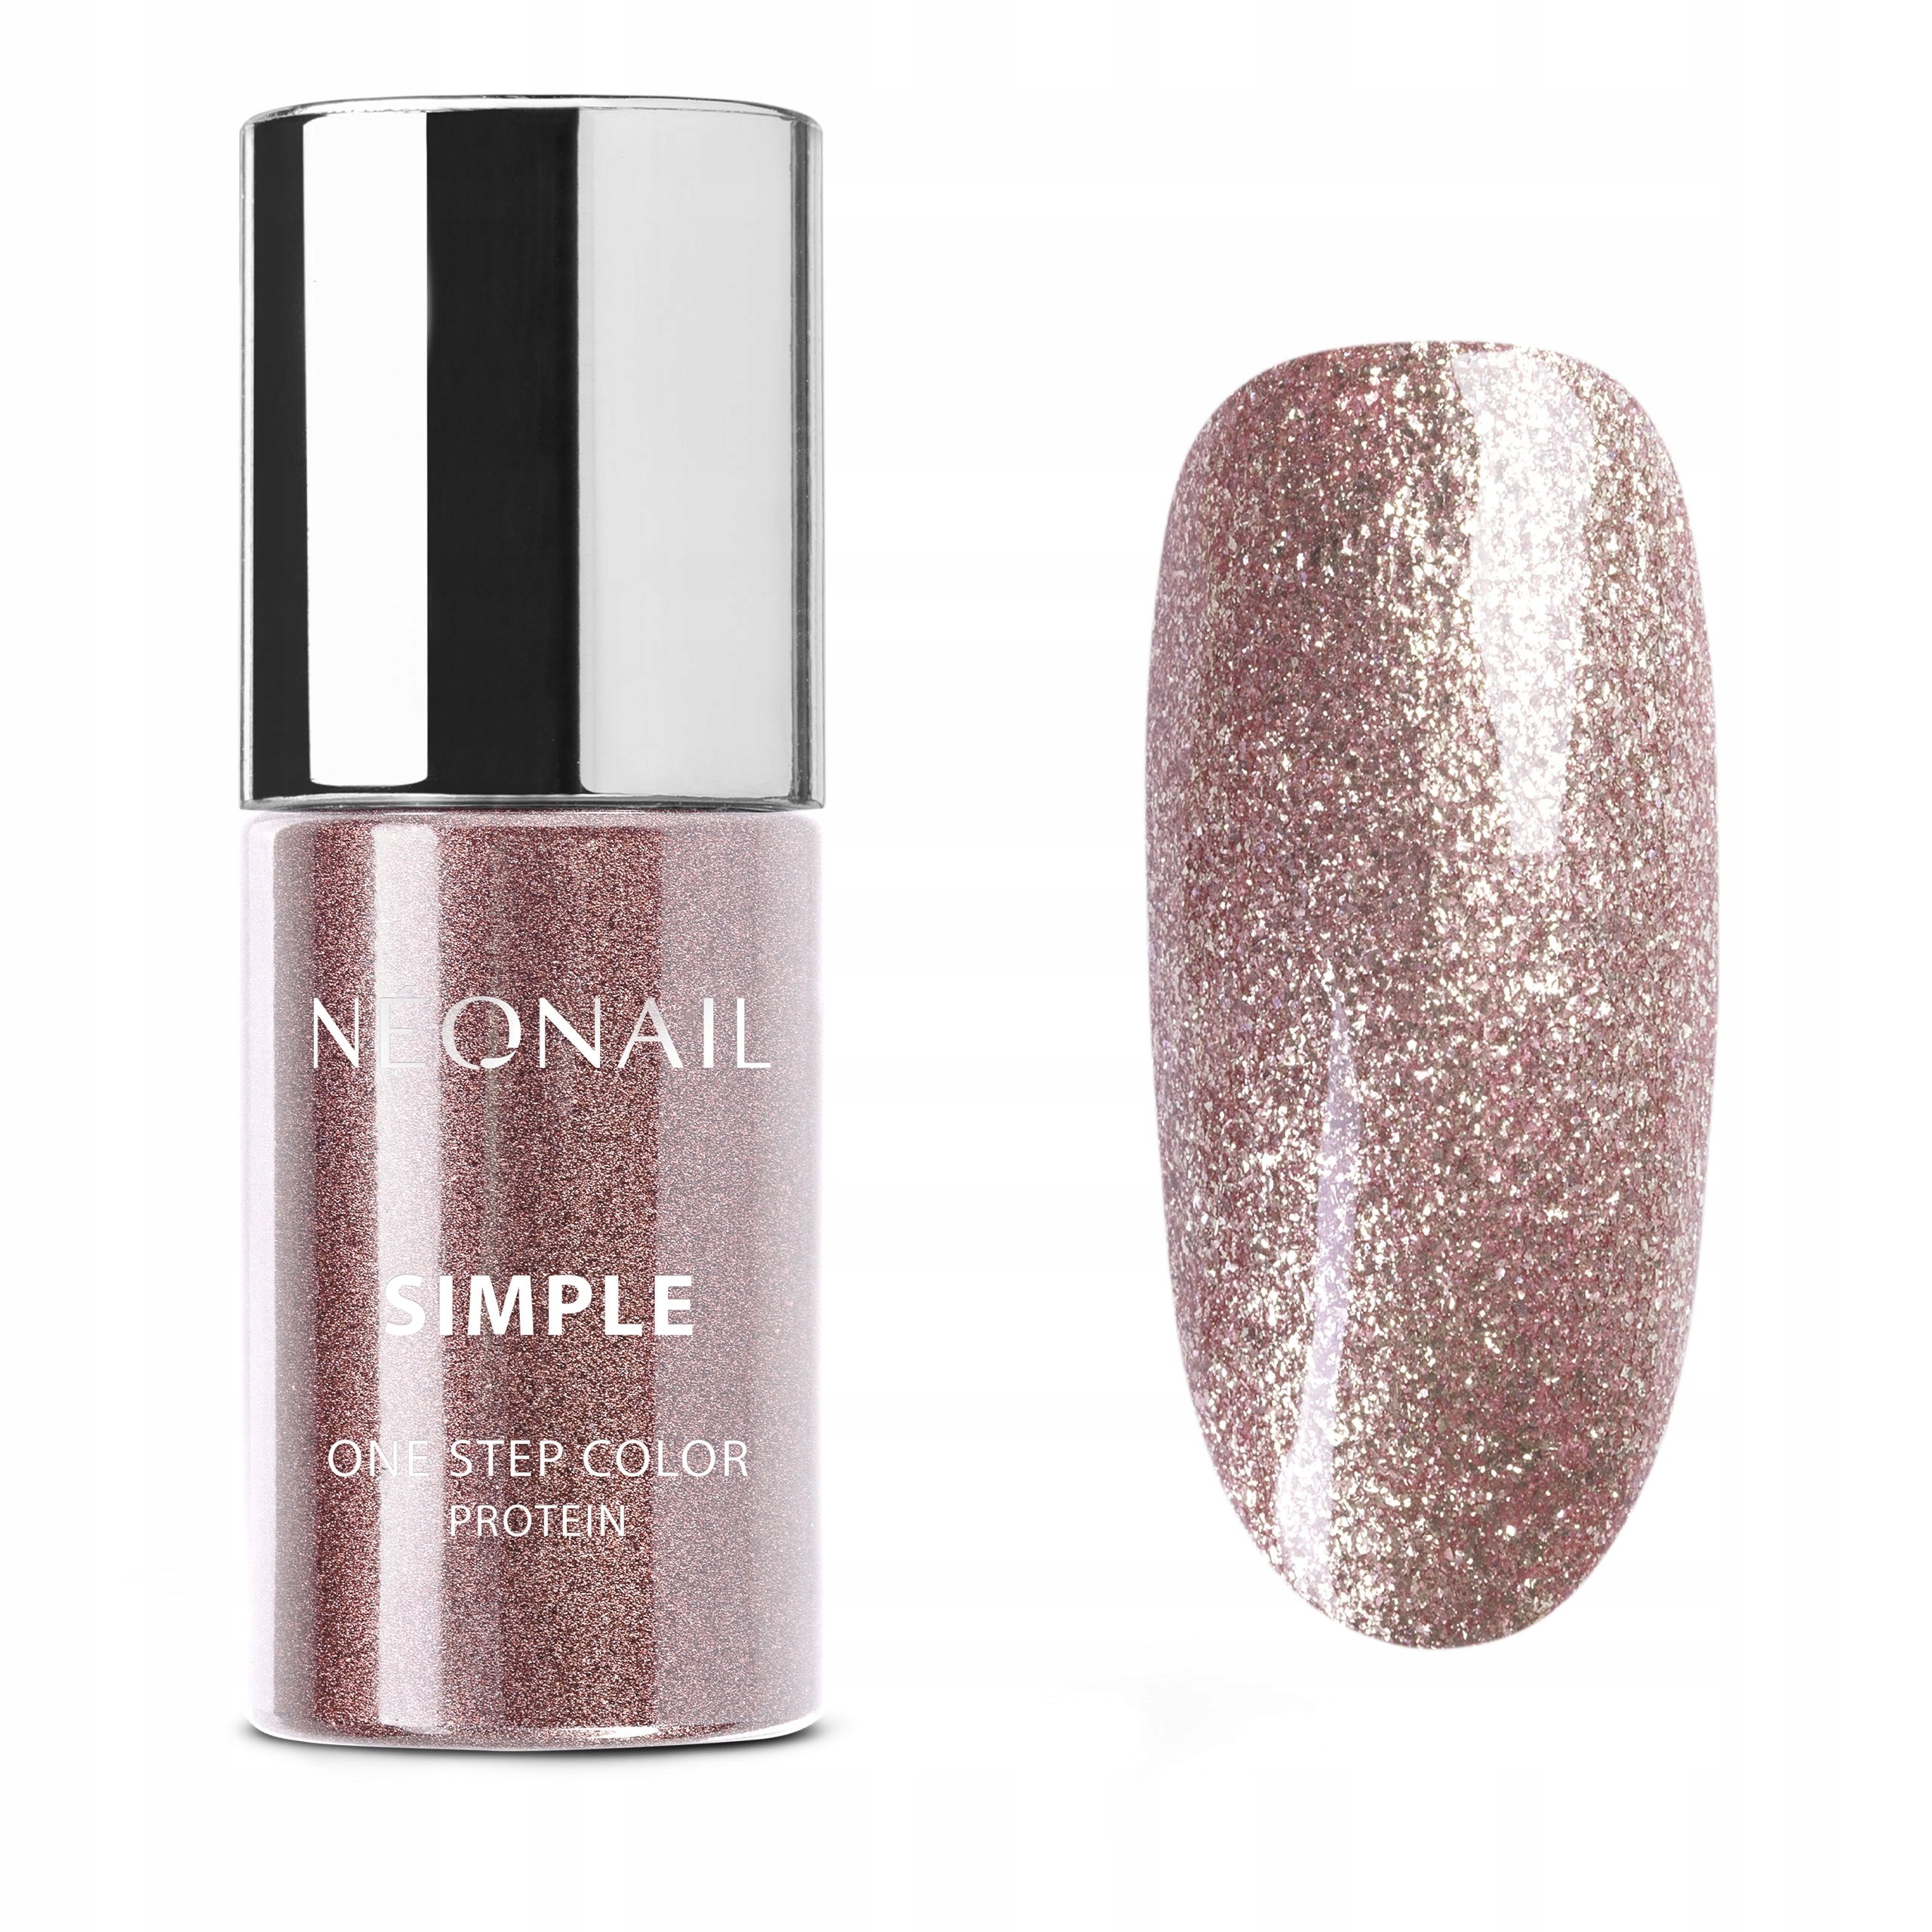 NEONAIL SIMPLE ONE STEP COLOR 3w1 INCREDIBLE 7,2g